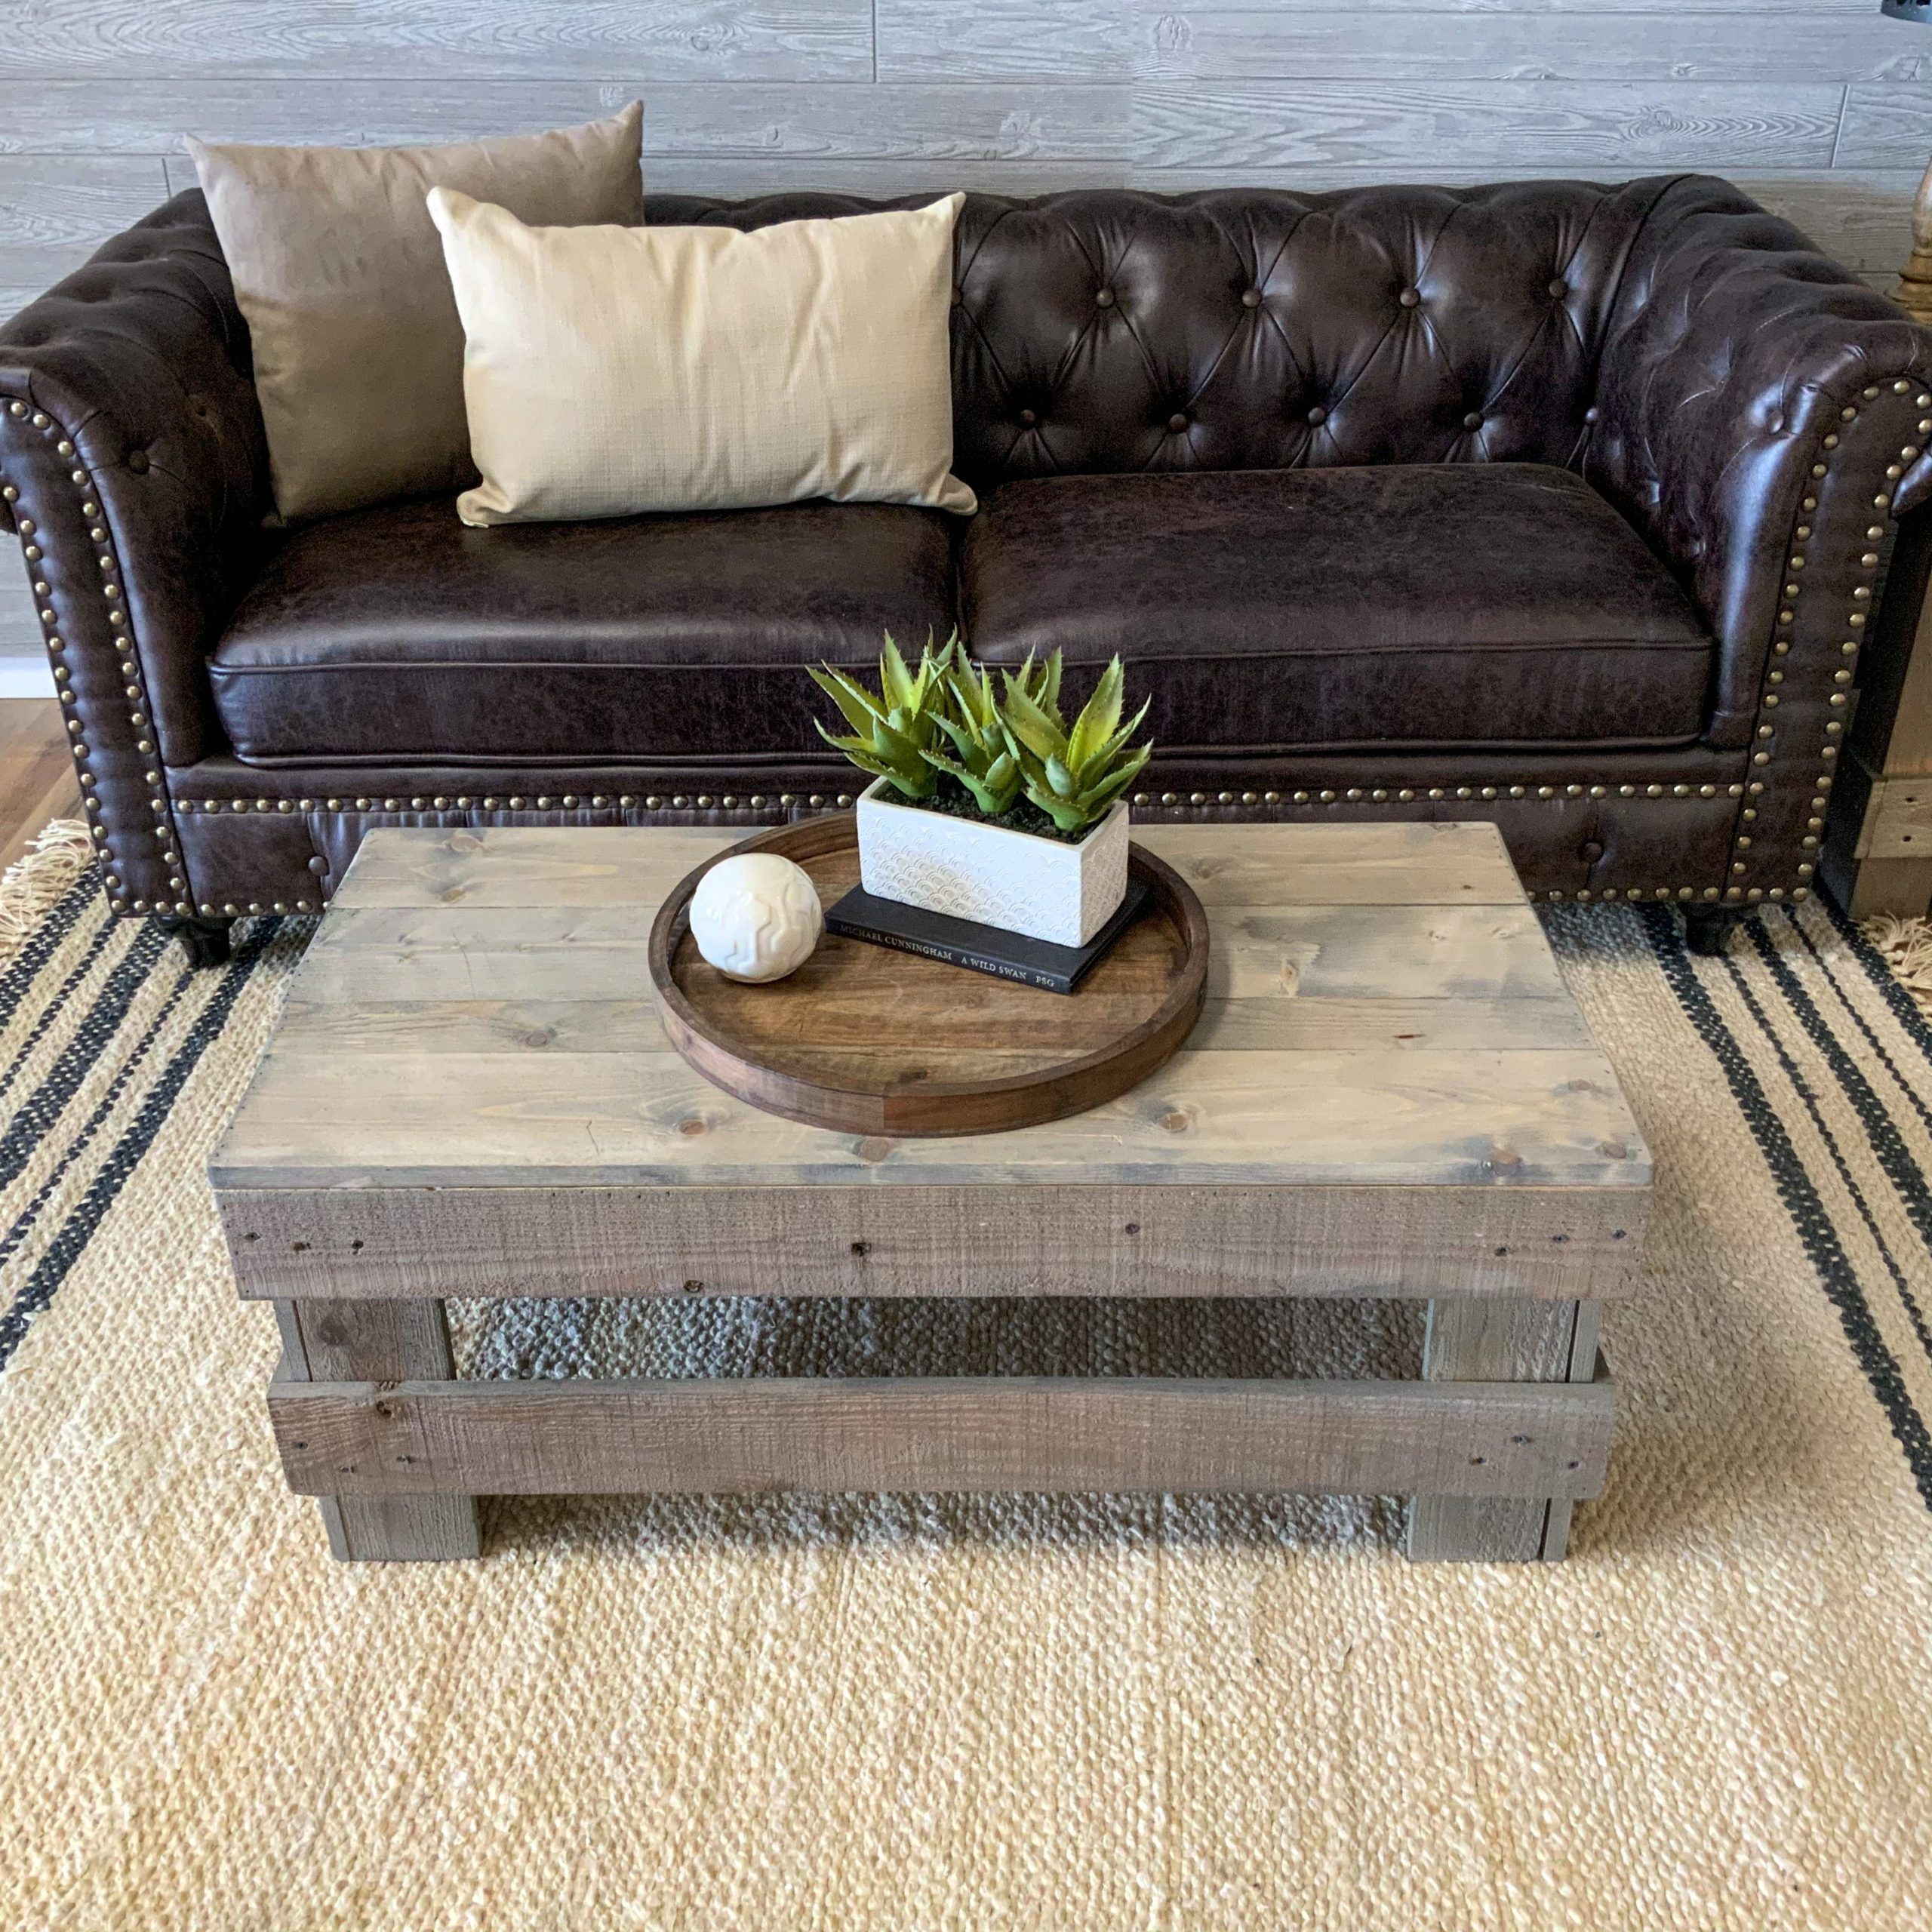 Woven Paths Landmark Pine Solid Wood Farmhouse Coffee Table, Gray Within Woven Paths Coffee Tables (View 11 of 15)